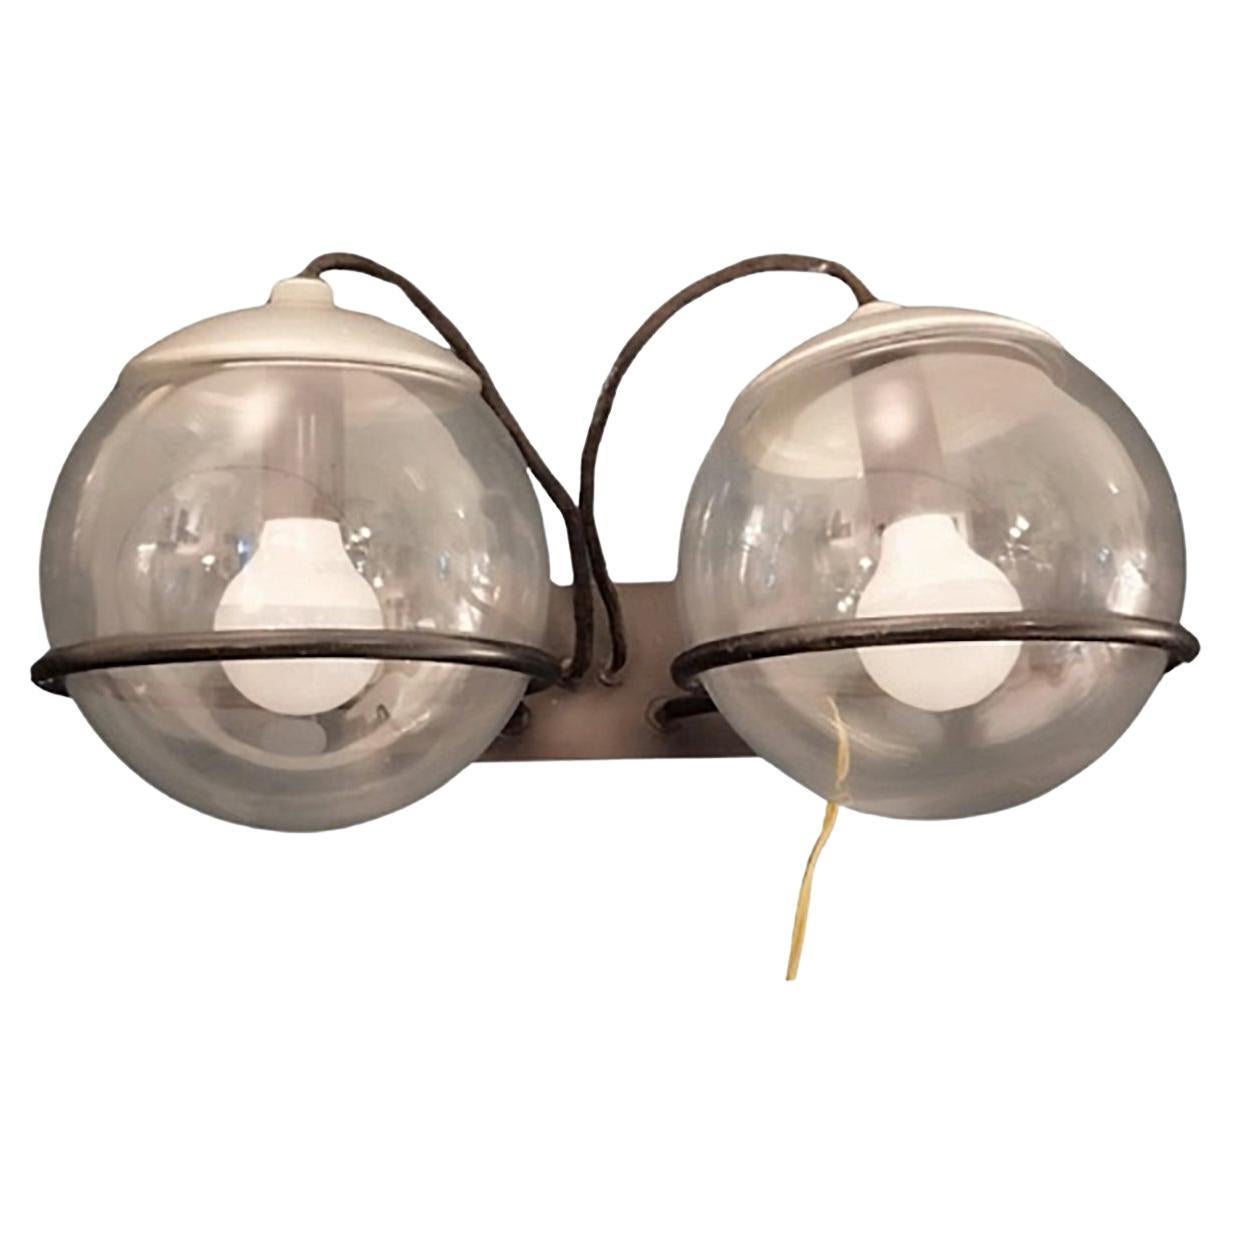 Gino Sarfatti for Arteluce Pair of Model 238/2 Wall Lamp, Italy 1960s For Sale